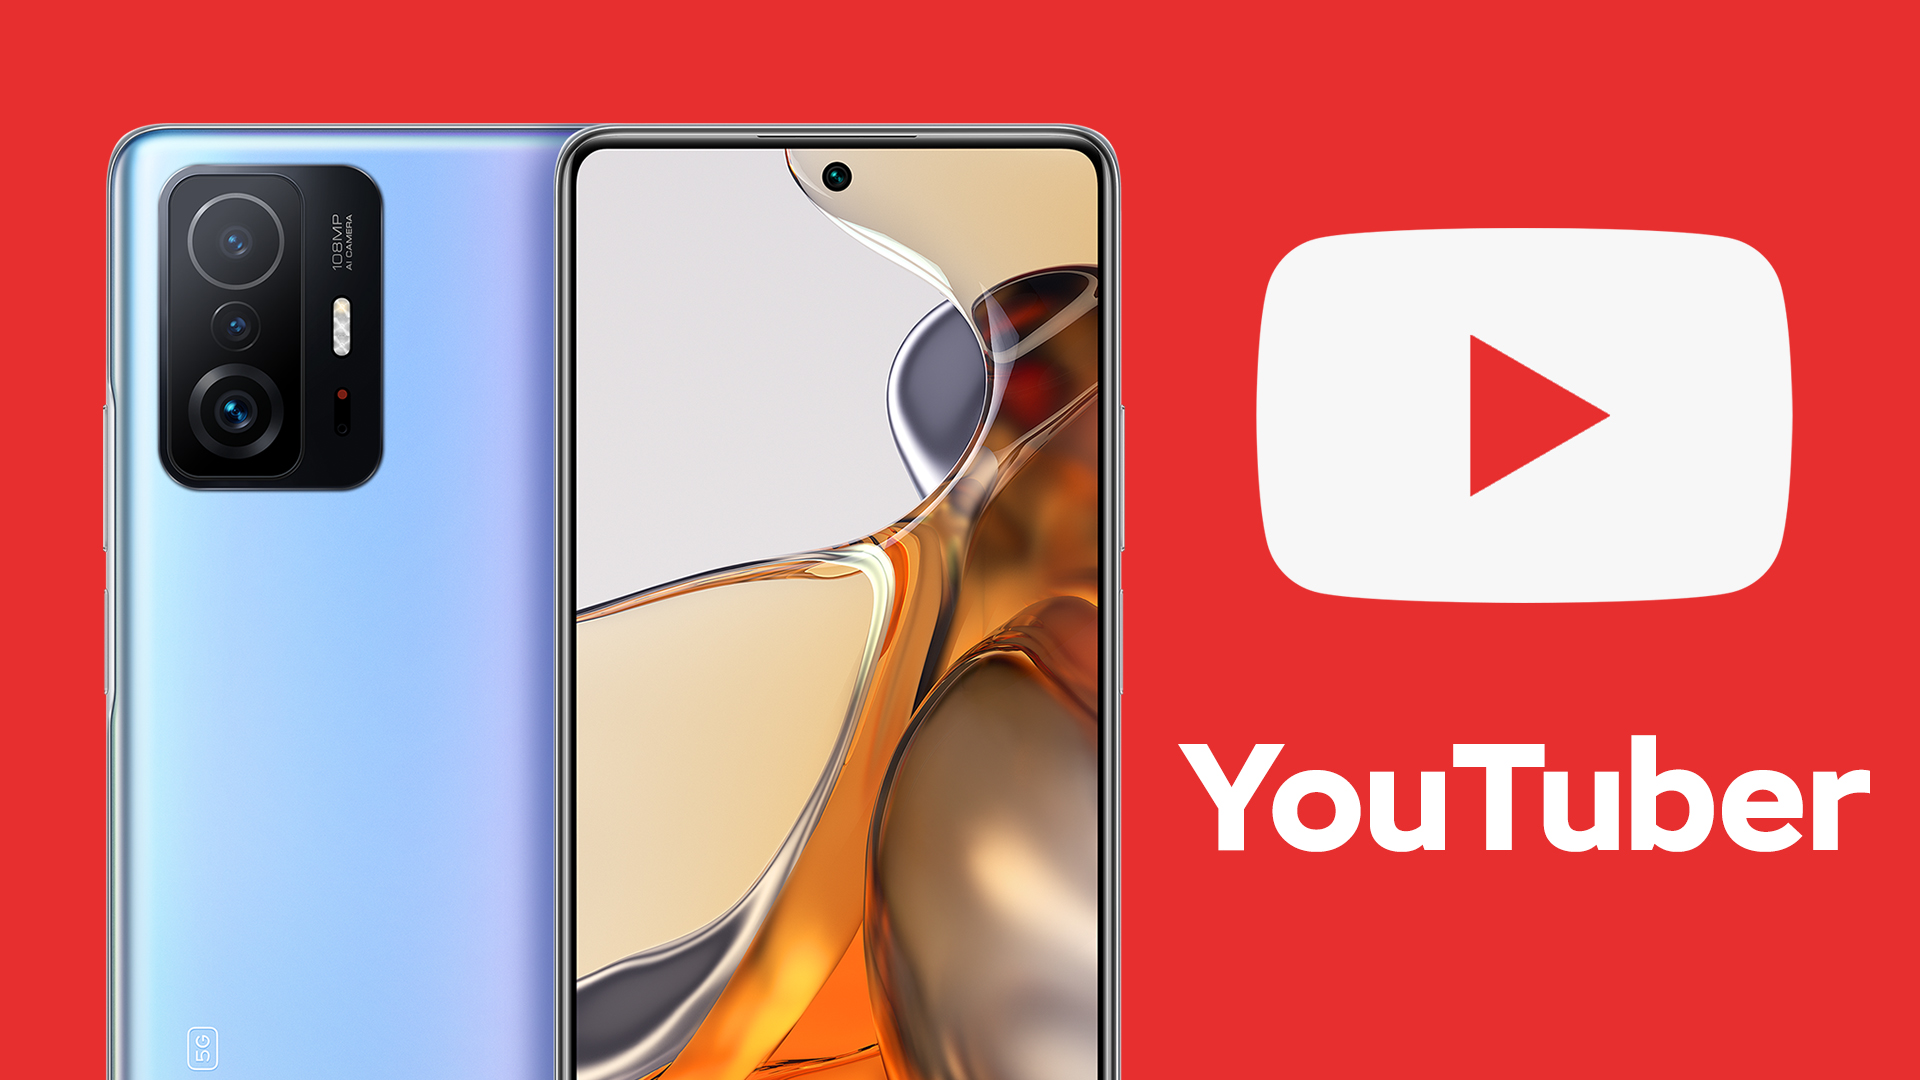 Seven Best Xiaomi Phones With Camera to Become a YouTuber